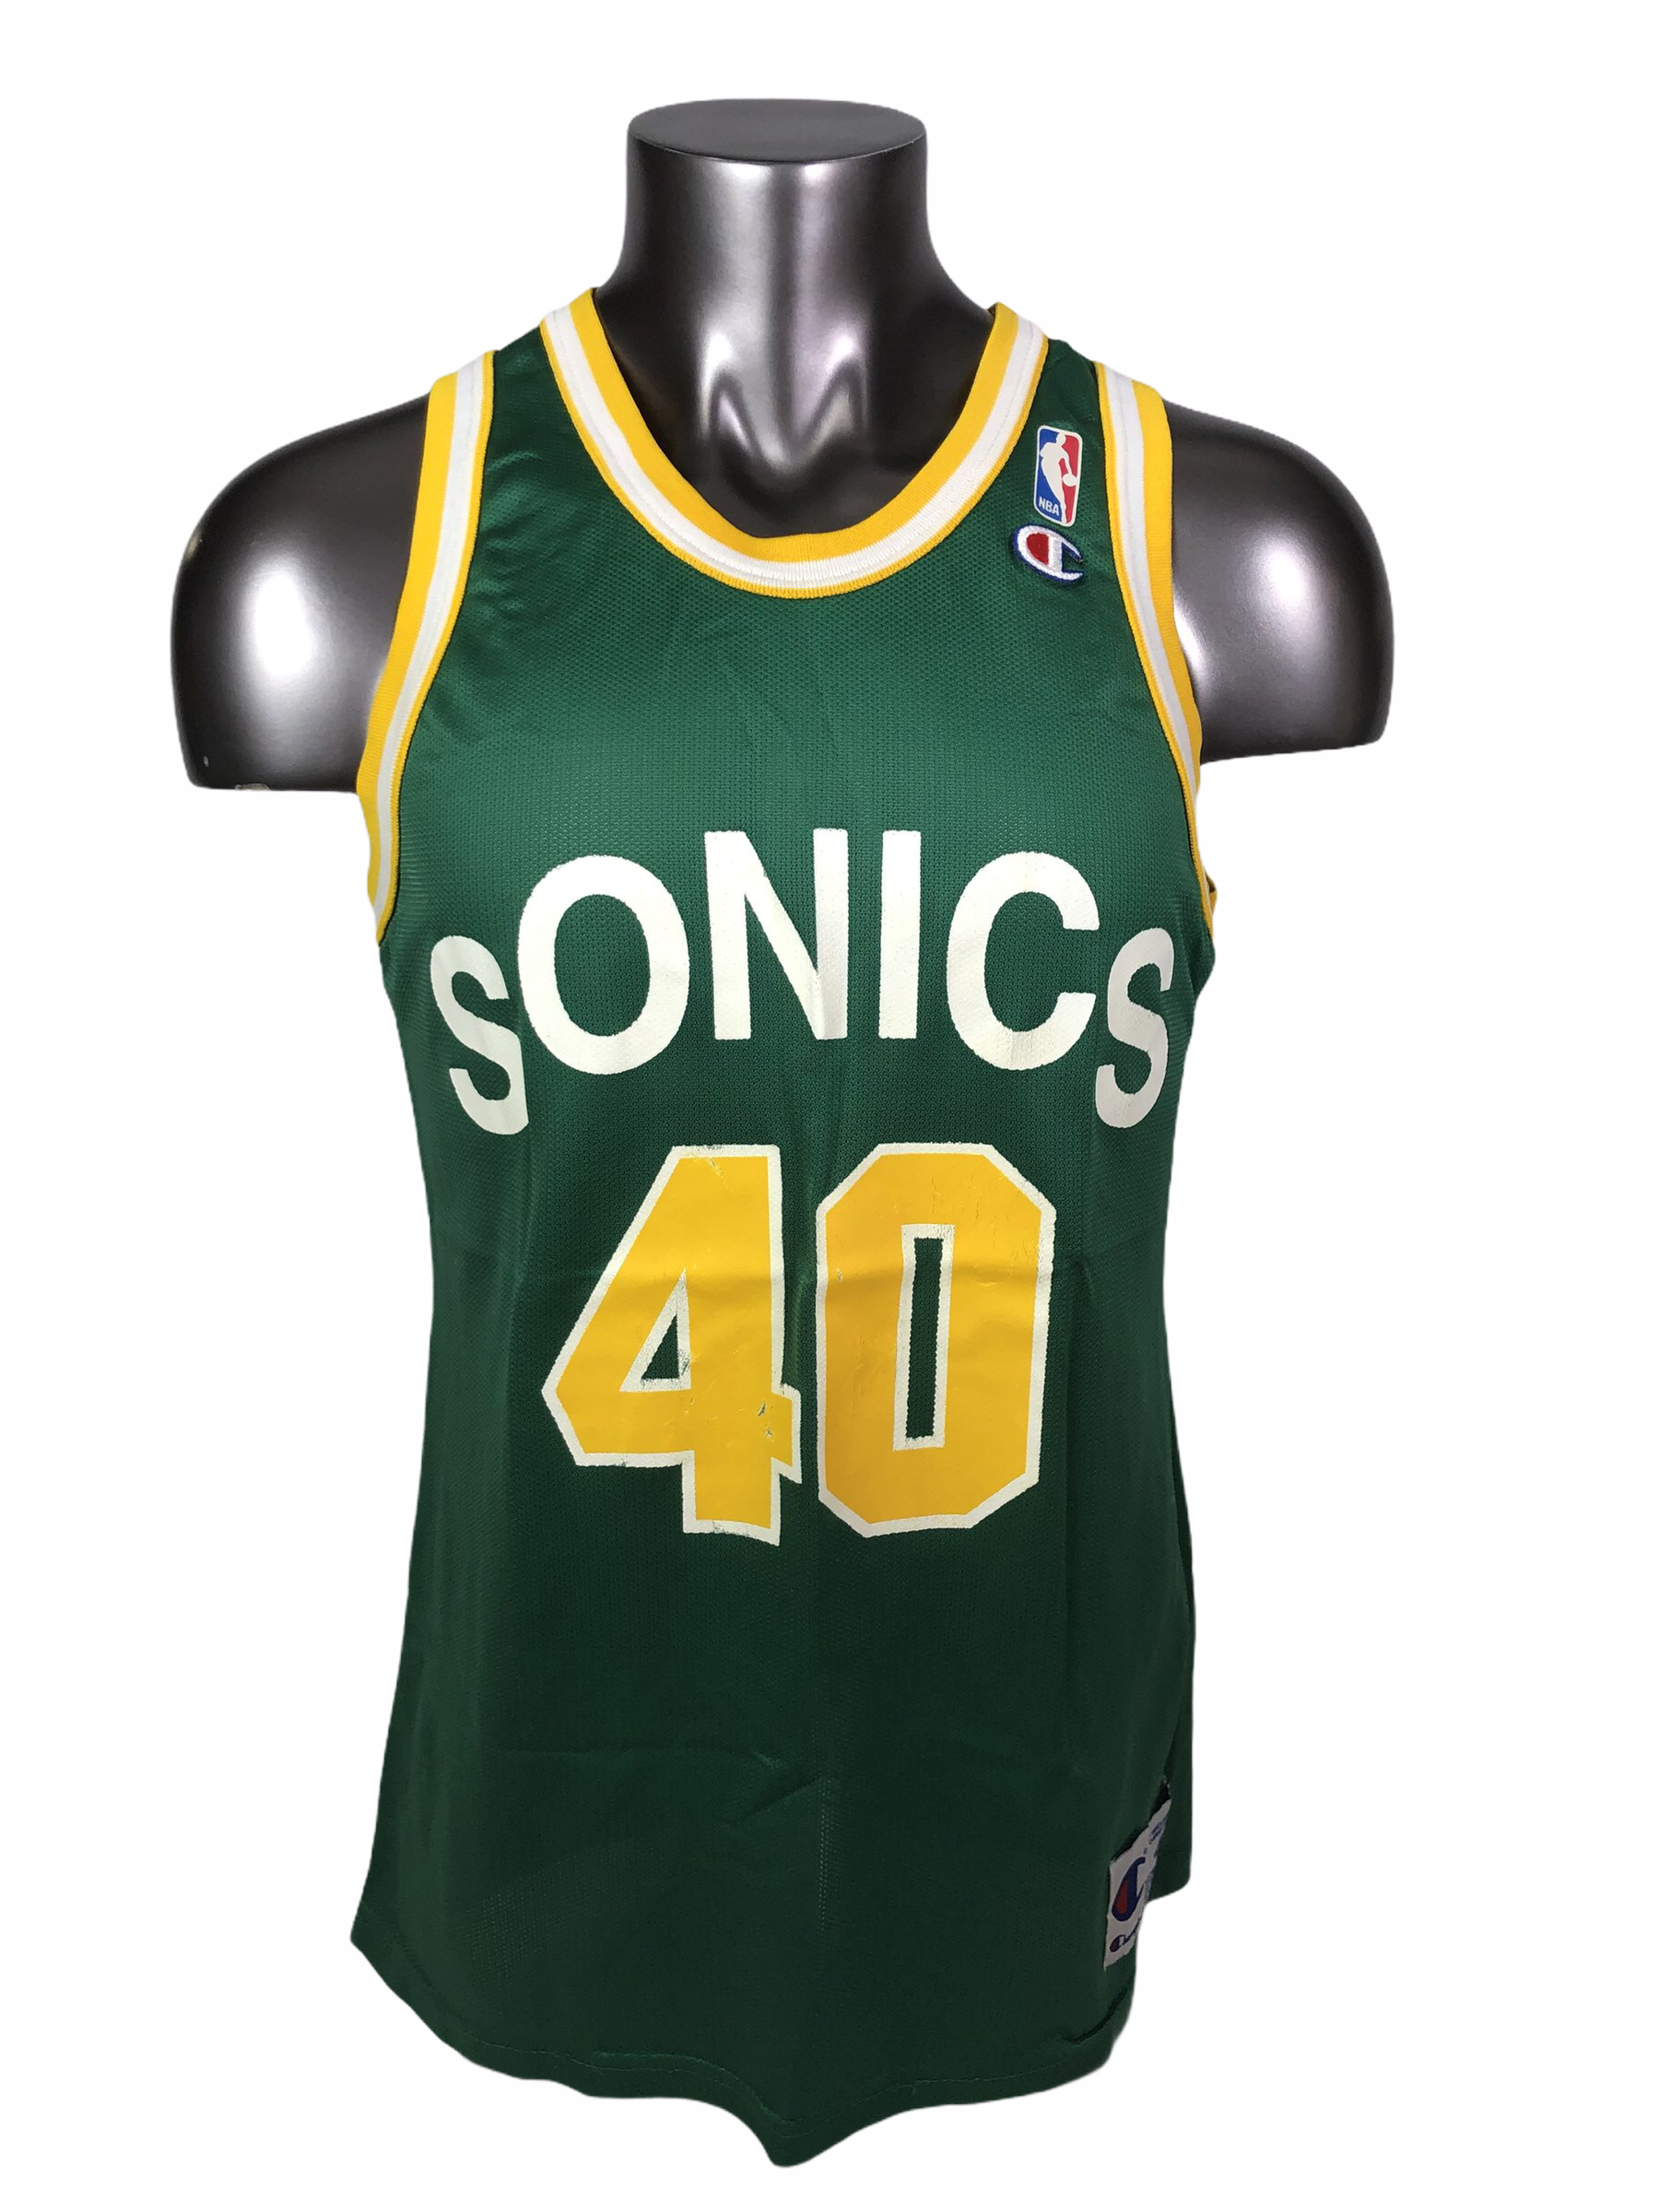 Vintage 90s Seattle SuperSonics Shawn Kemp Jersey by Champion – Thieves  Market Vintage